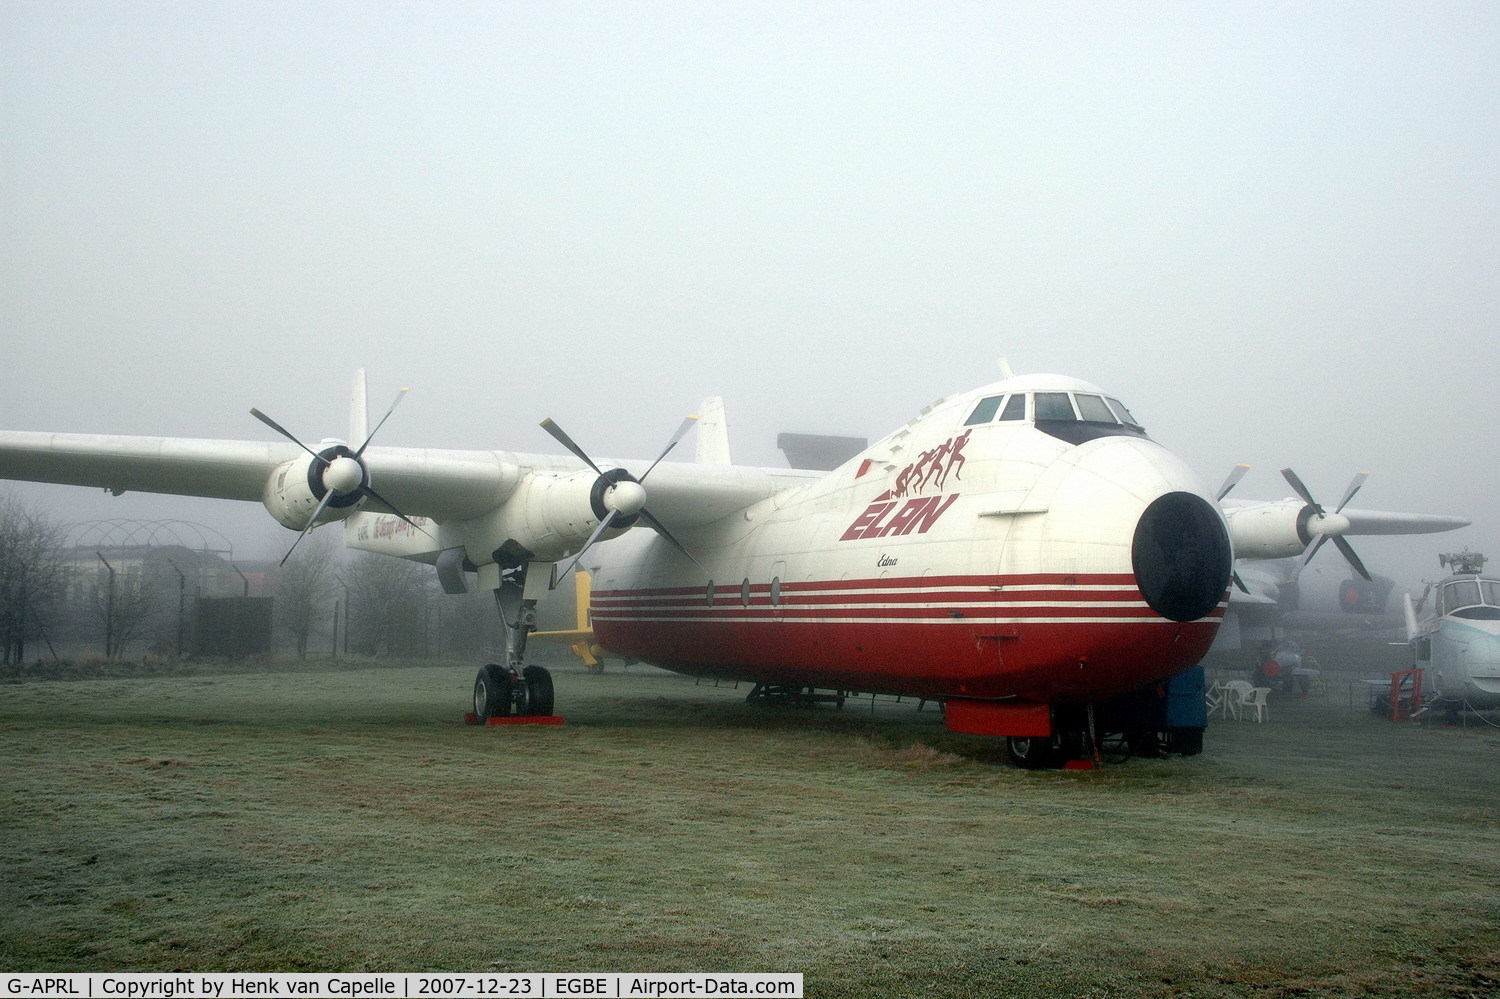 G-APRL, 1959 Armstrong Whitworth AW650 Argosy 101 C/N 6652, Argosy in frosty mist at the Midland Air Museum, Coventry, UK